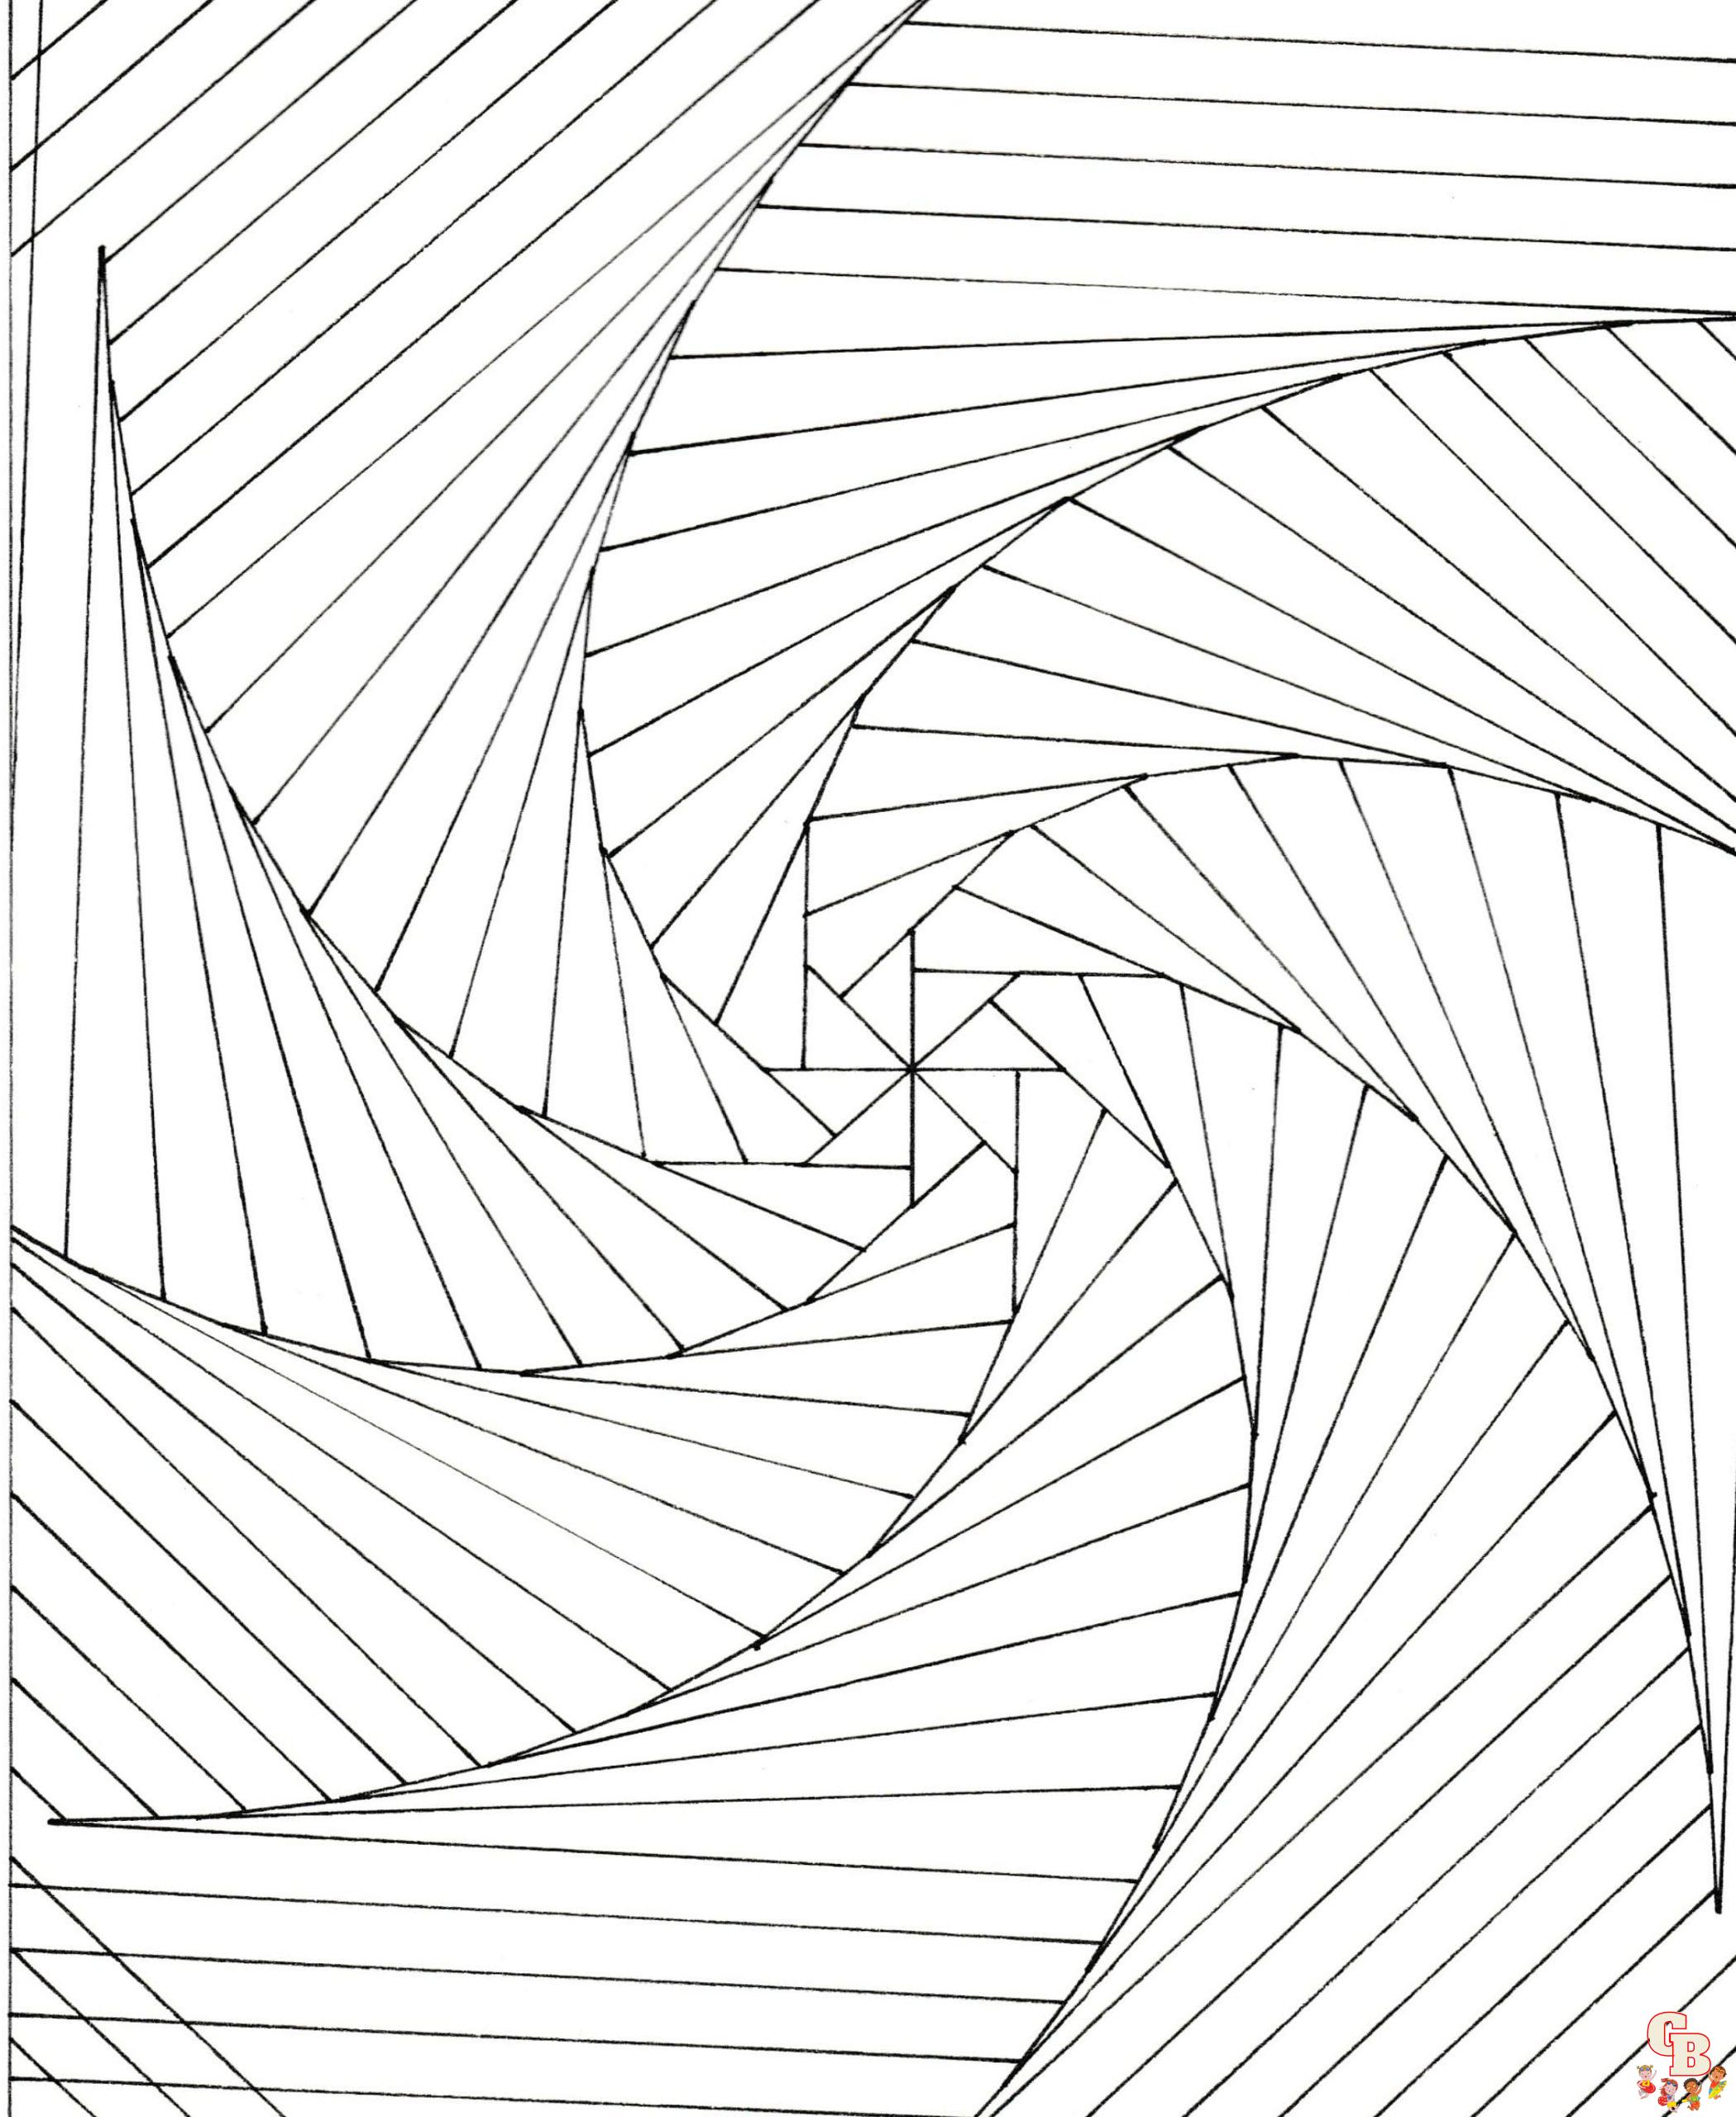 Printable Spiral Coloring Pages Free For Kids And Adults